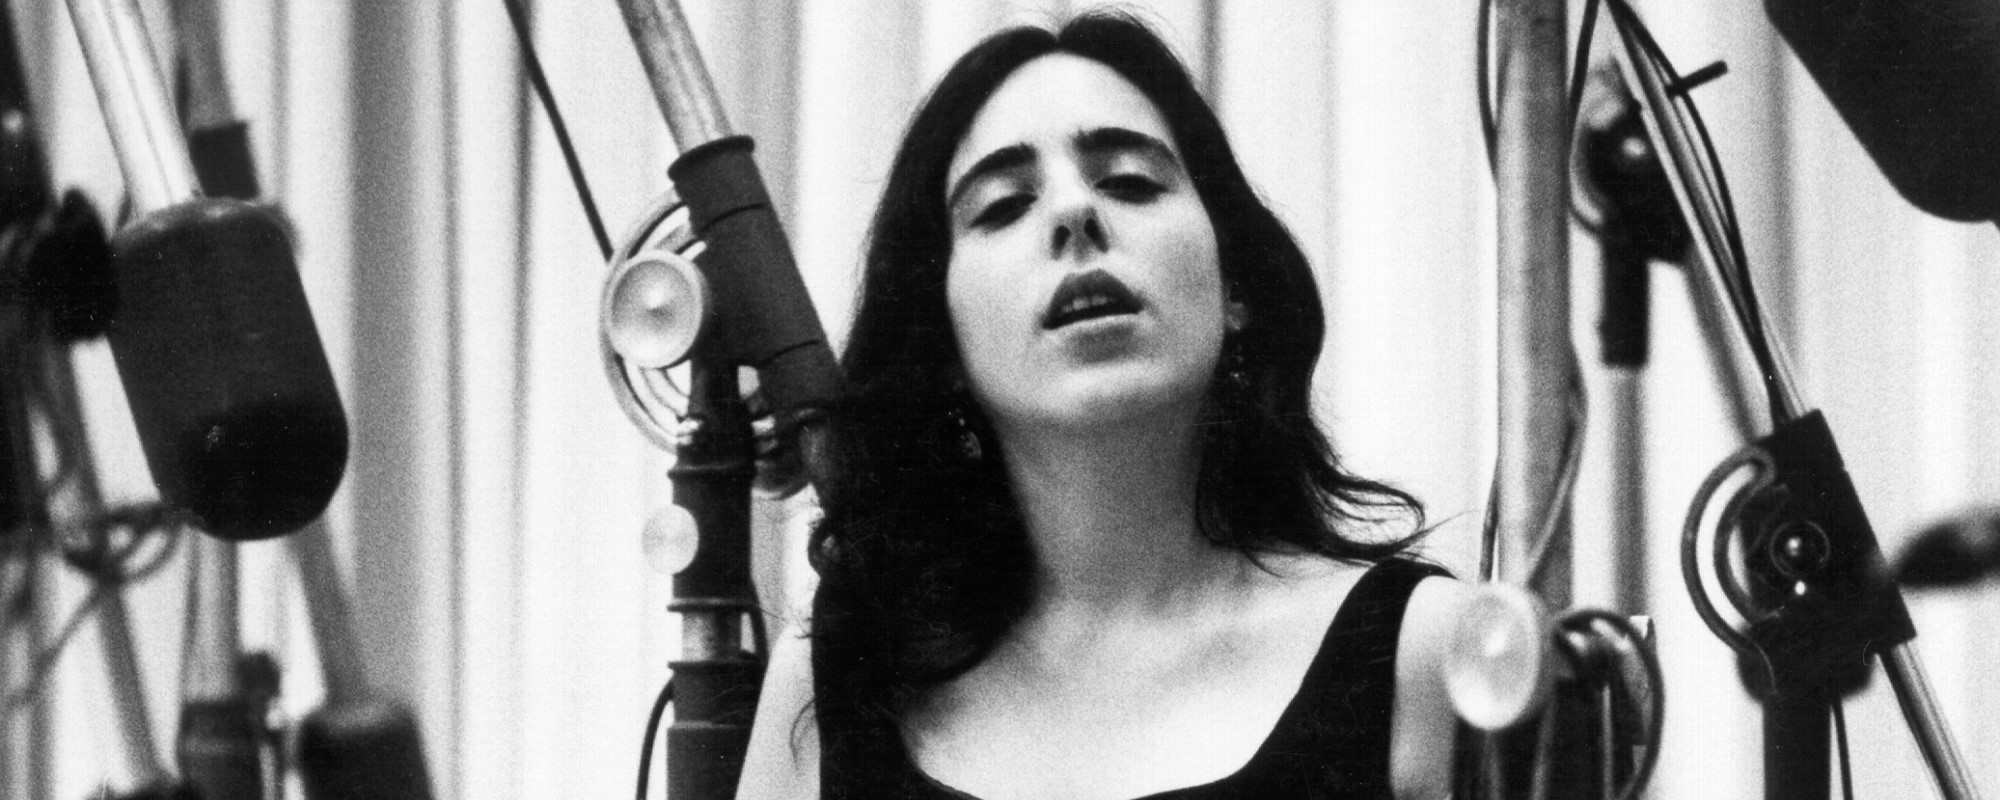 5 Laura Nyro Songs That Were Hits for The 5th Dimension, Barbra Streisand, and Other Stars